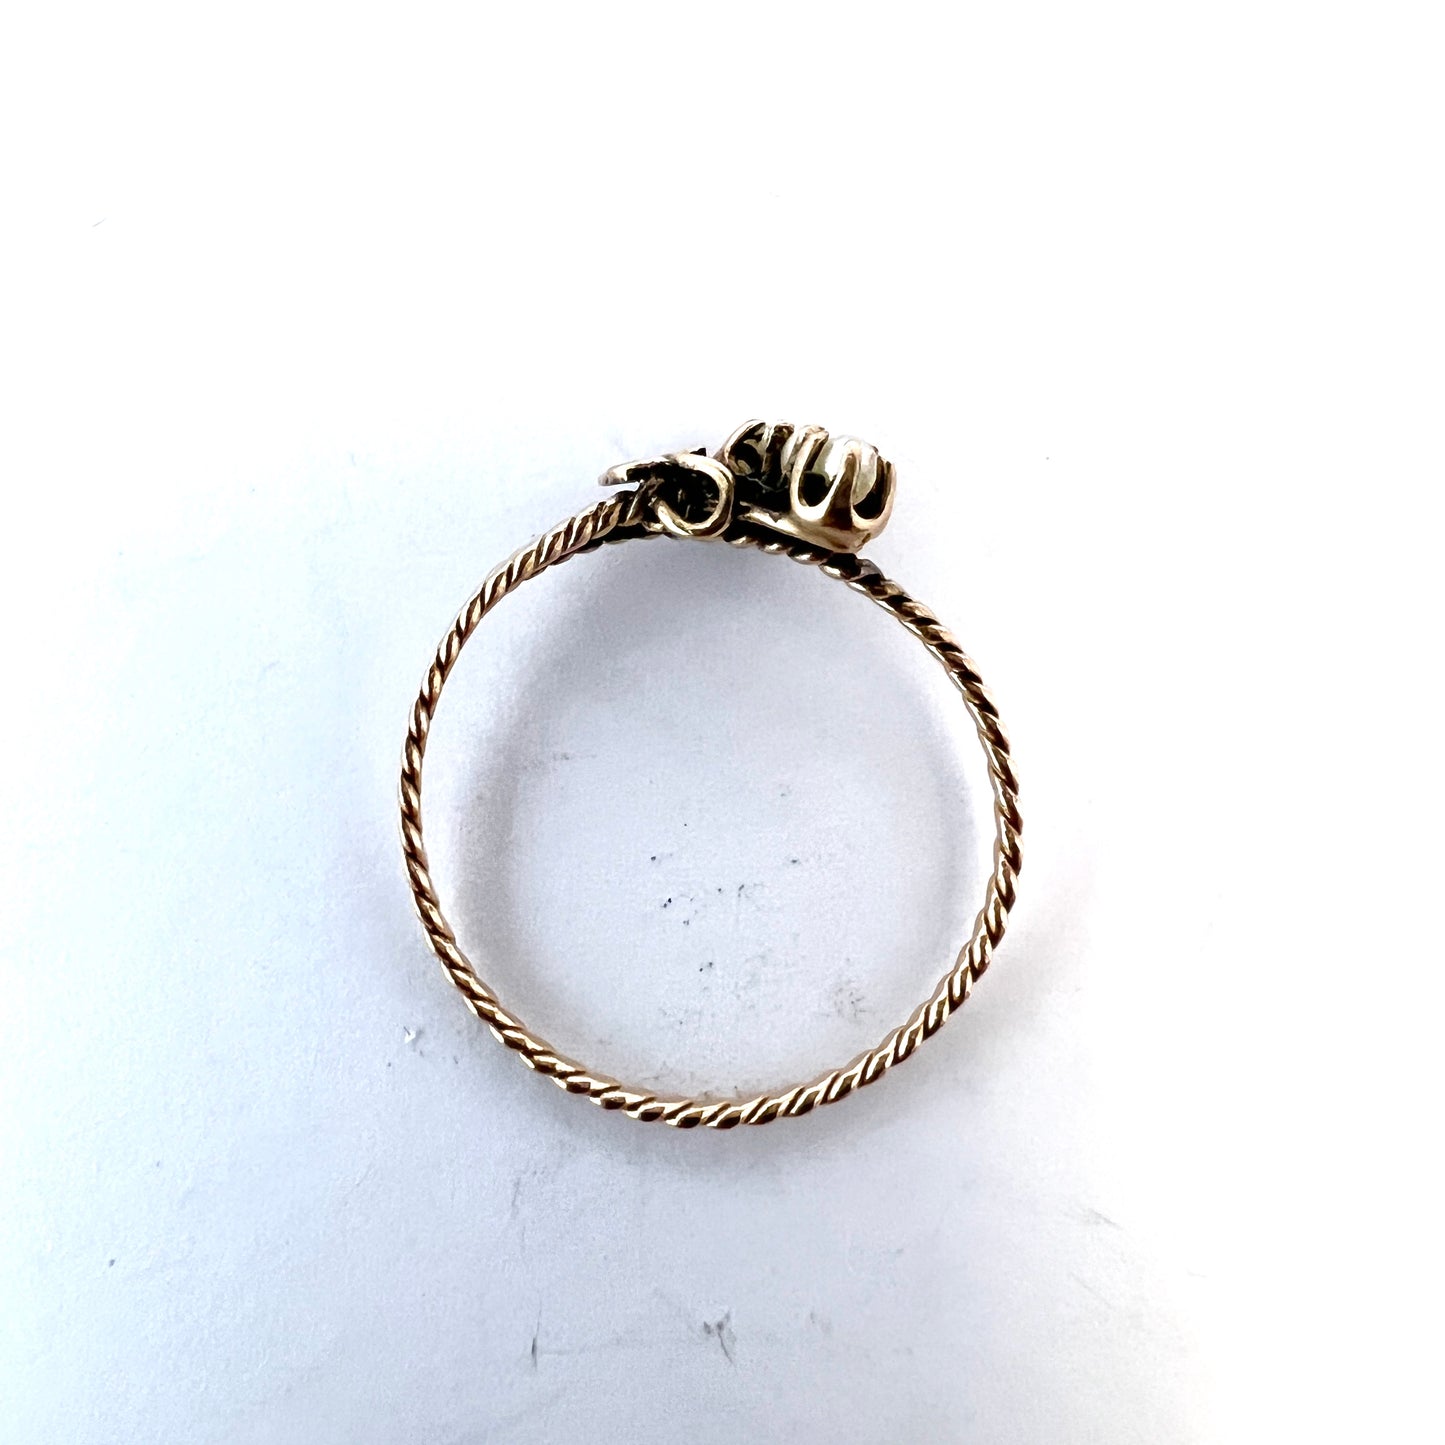 Antique 14k Gold Seed Pearl Ring.